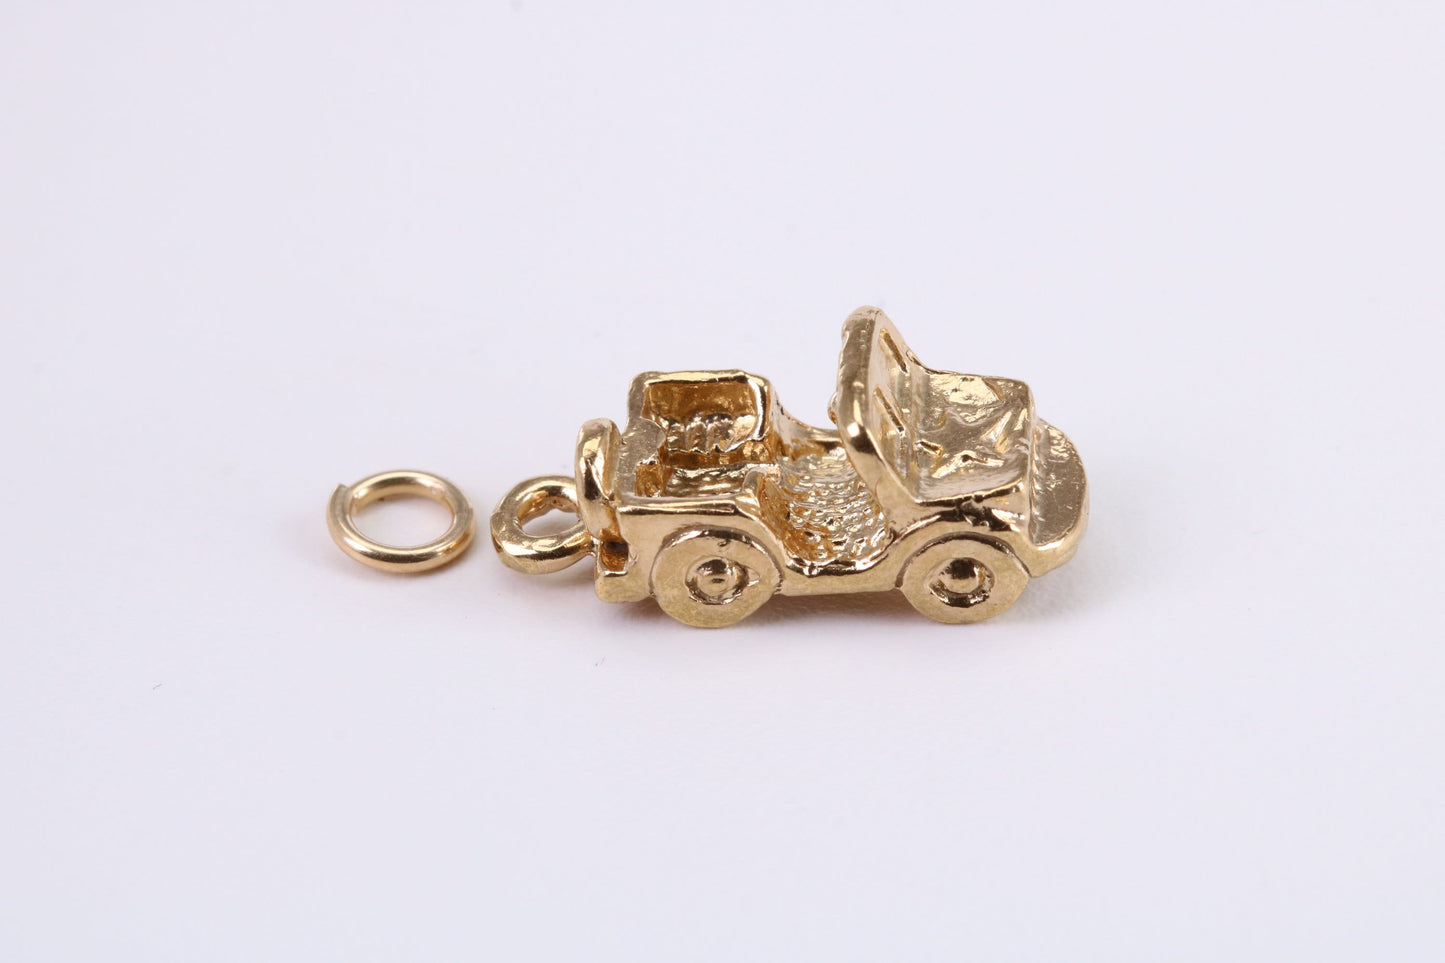 Car Charm, Traditional Charm, Made from Solid Yellow Gold, British Hallmarked, Complete with Attachment Link